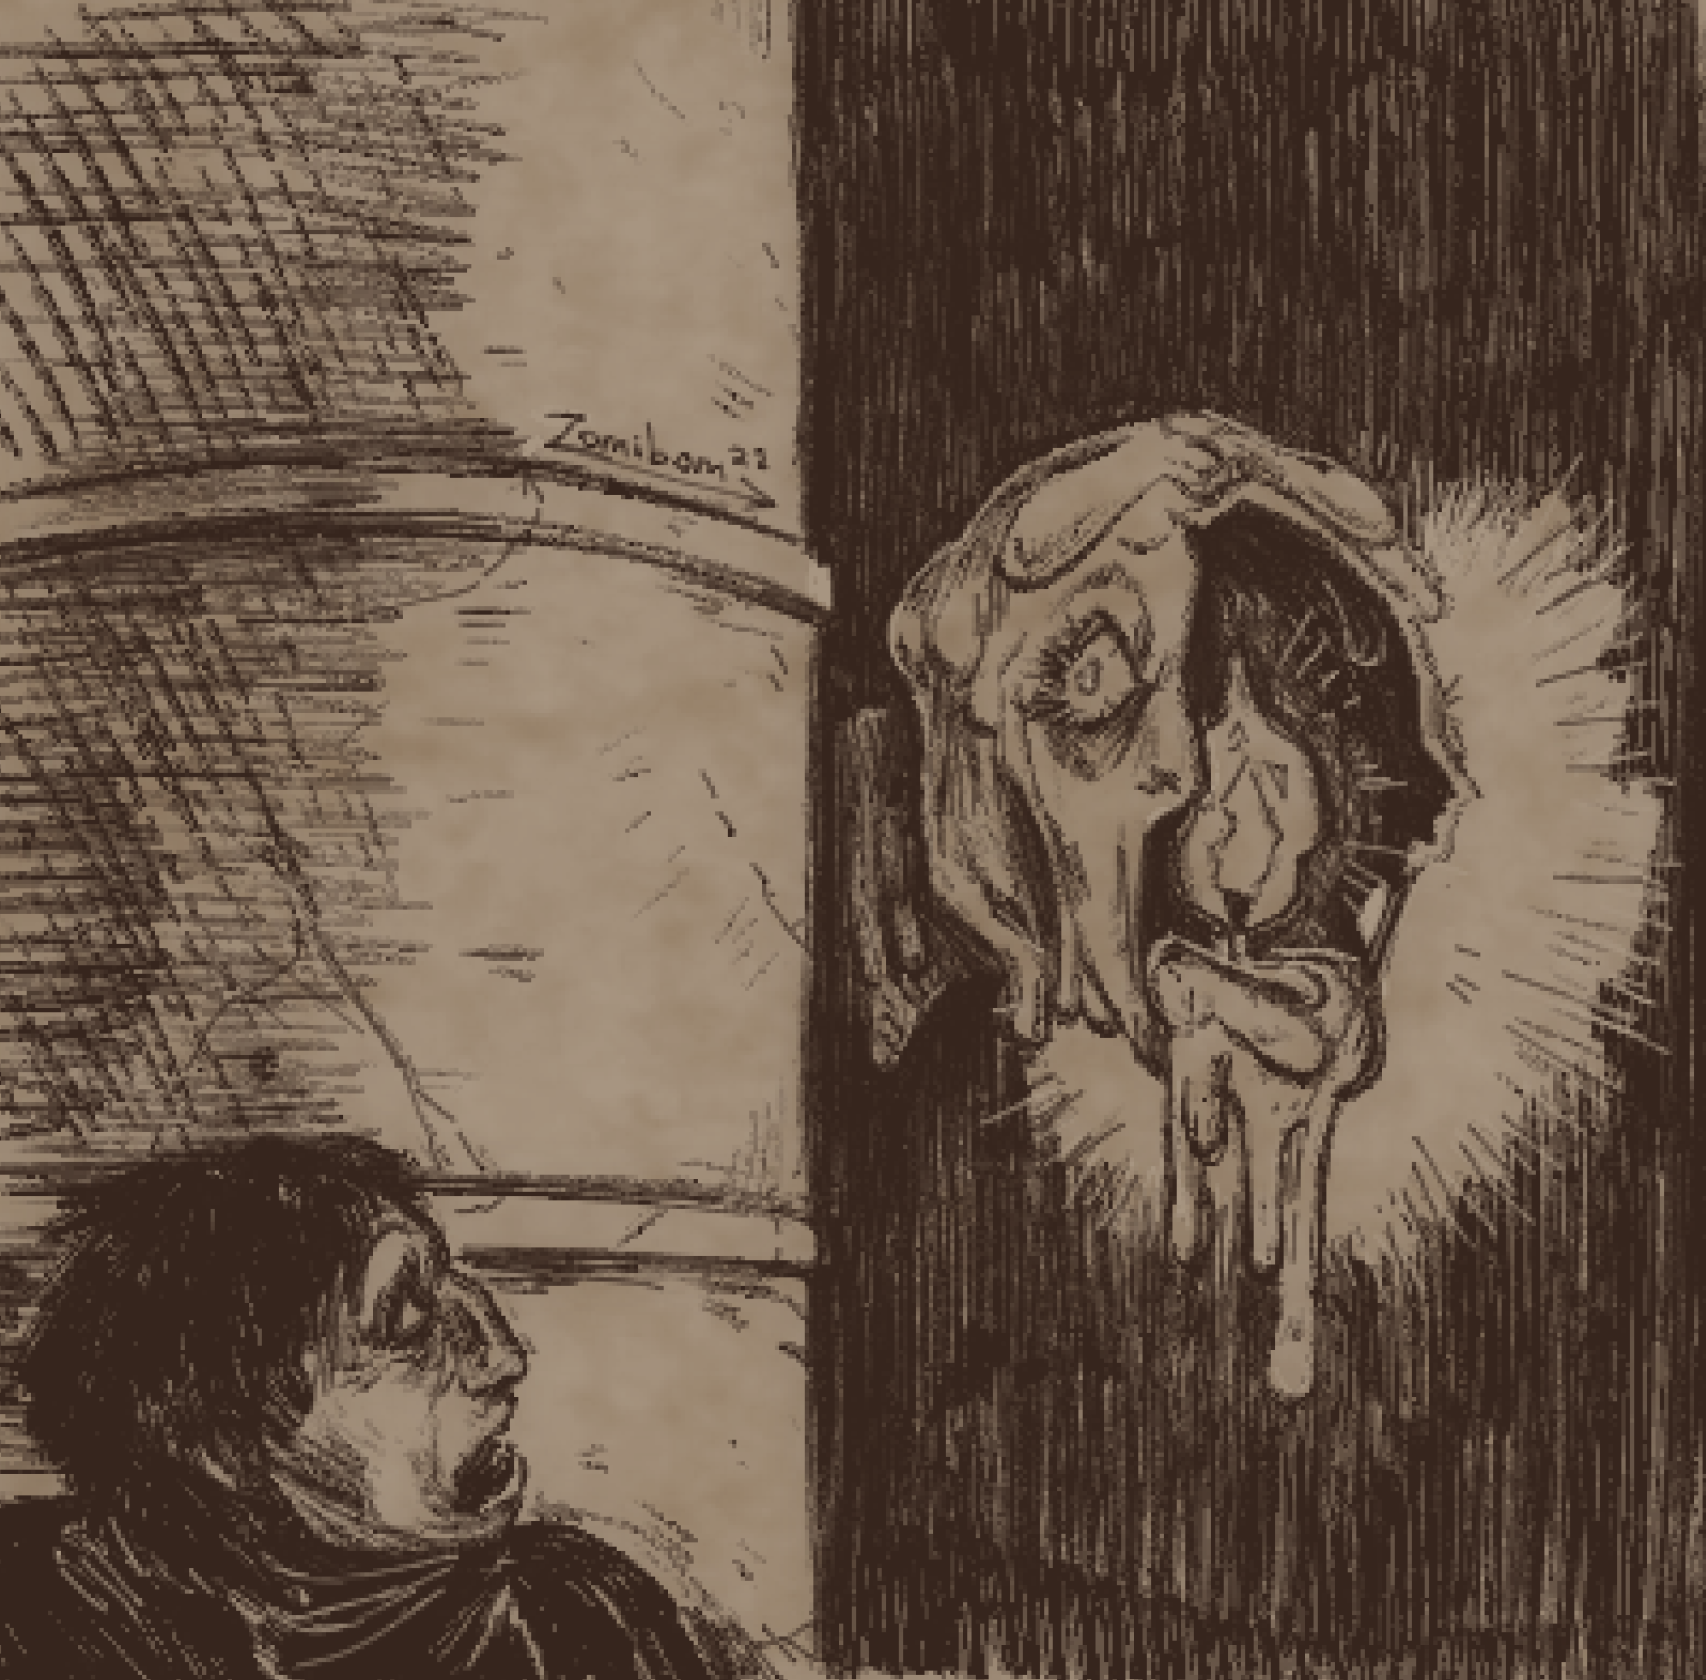 Sketch of horrified man behind segmented pillar. A creature with a melting wax body looks out from behind the pillar, its face sloughing off to reveal a candle